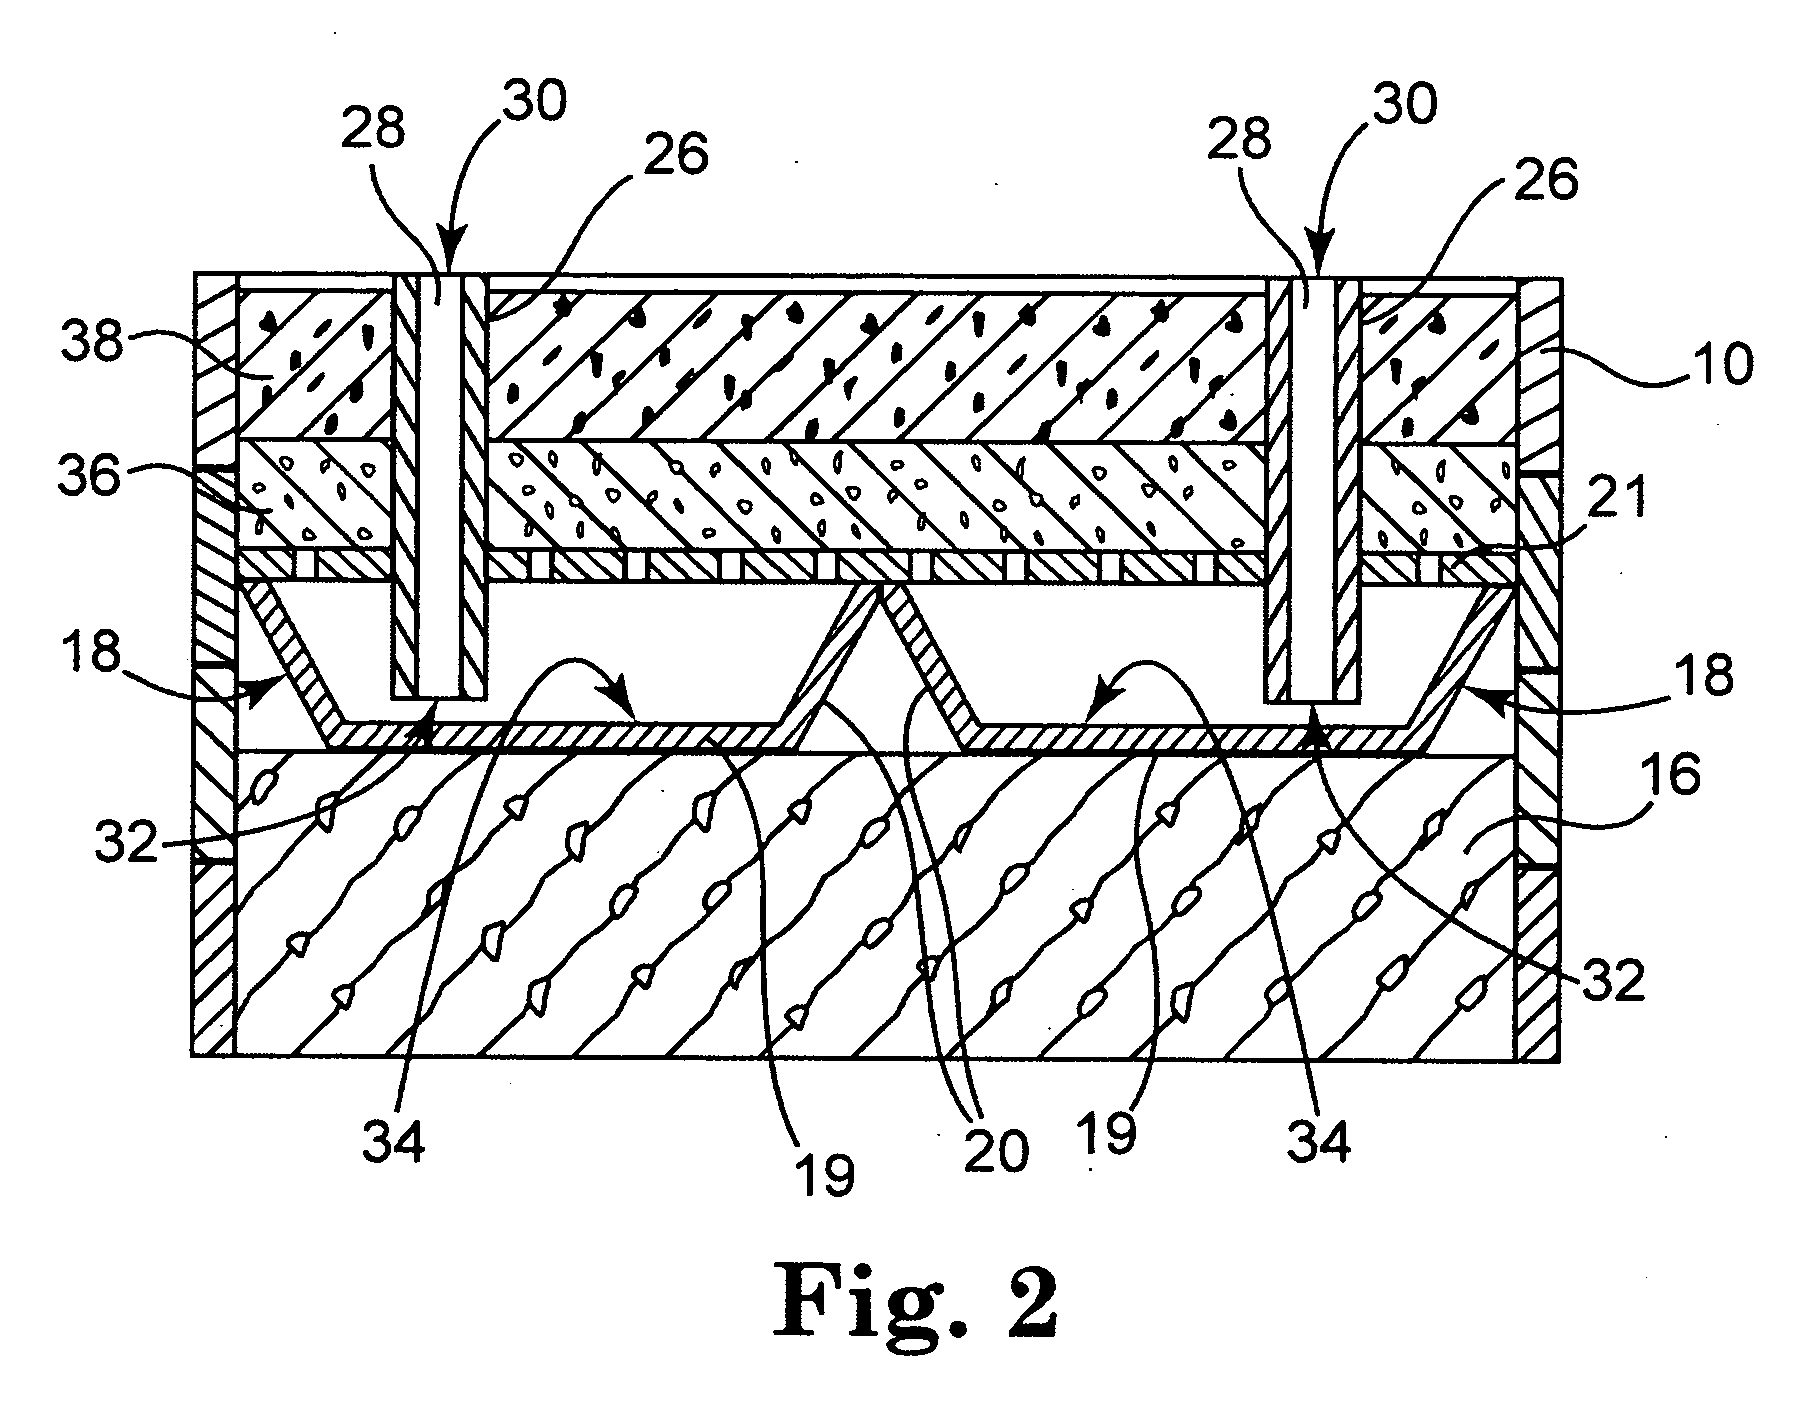 Garden or planter system with elevated bed and water reservoir